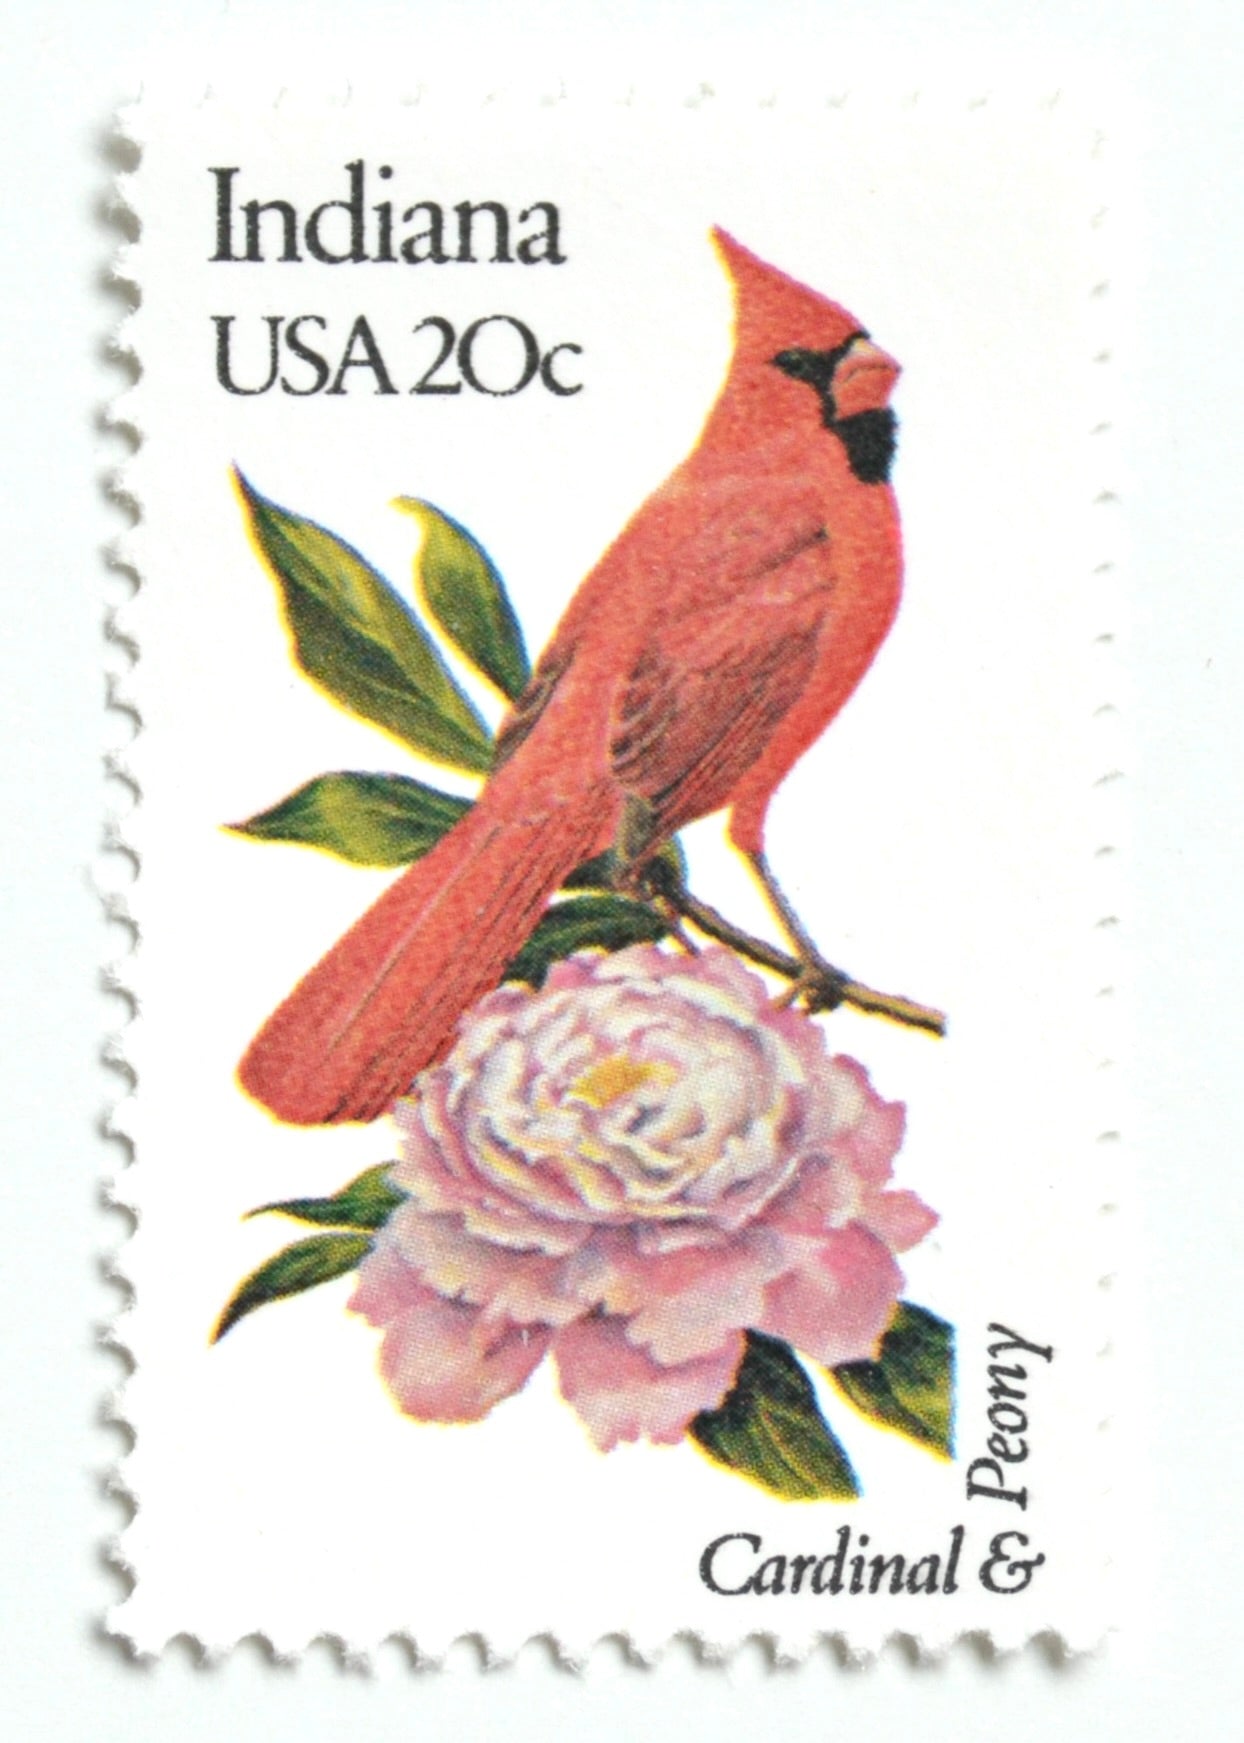 10 Red Flower Forever Stamps Unused Postage For Mailing Wedding